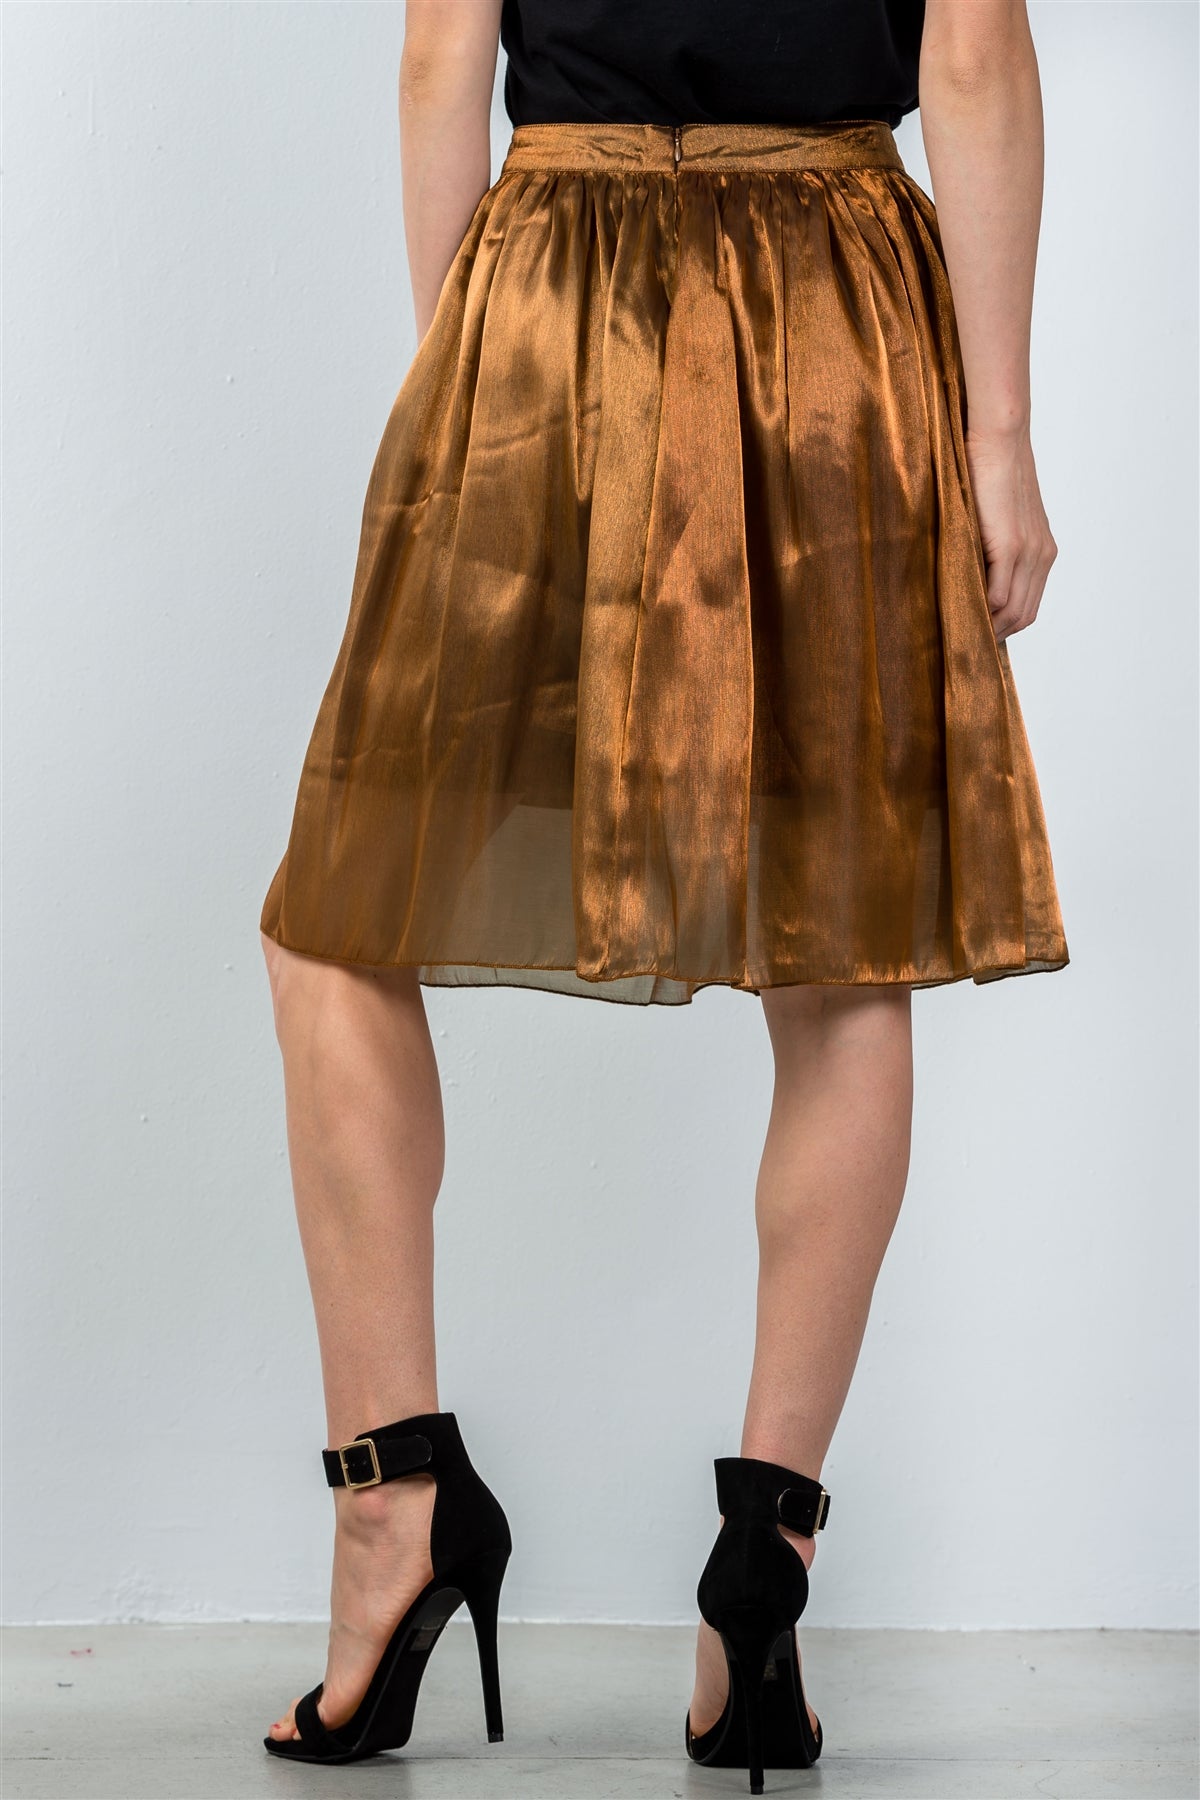 Our Best 100% Polyester High Rise Elastic Waist Unlined Semi-Sheer Pleated Midi Skirt (Bronze)